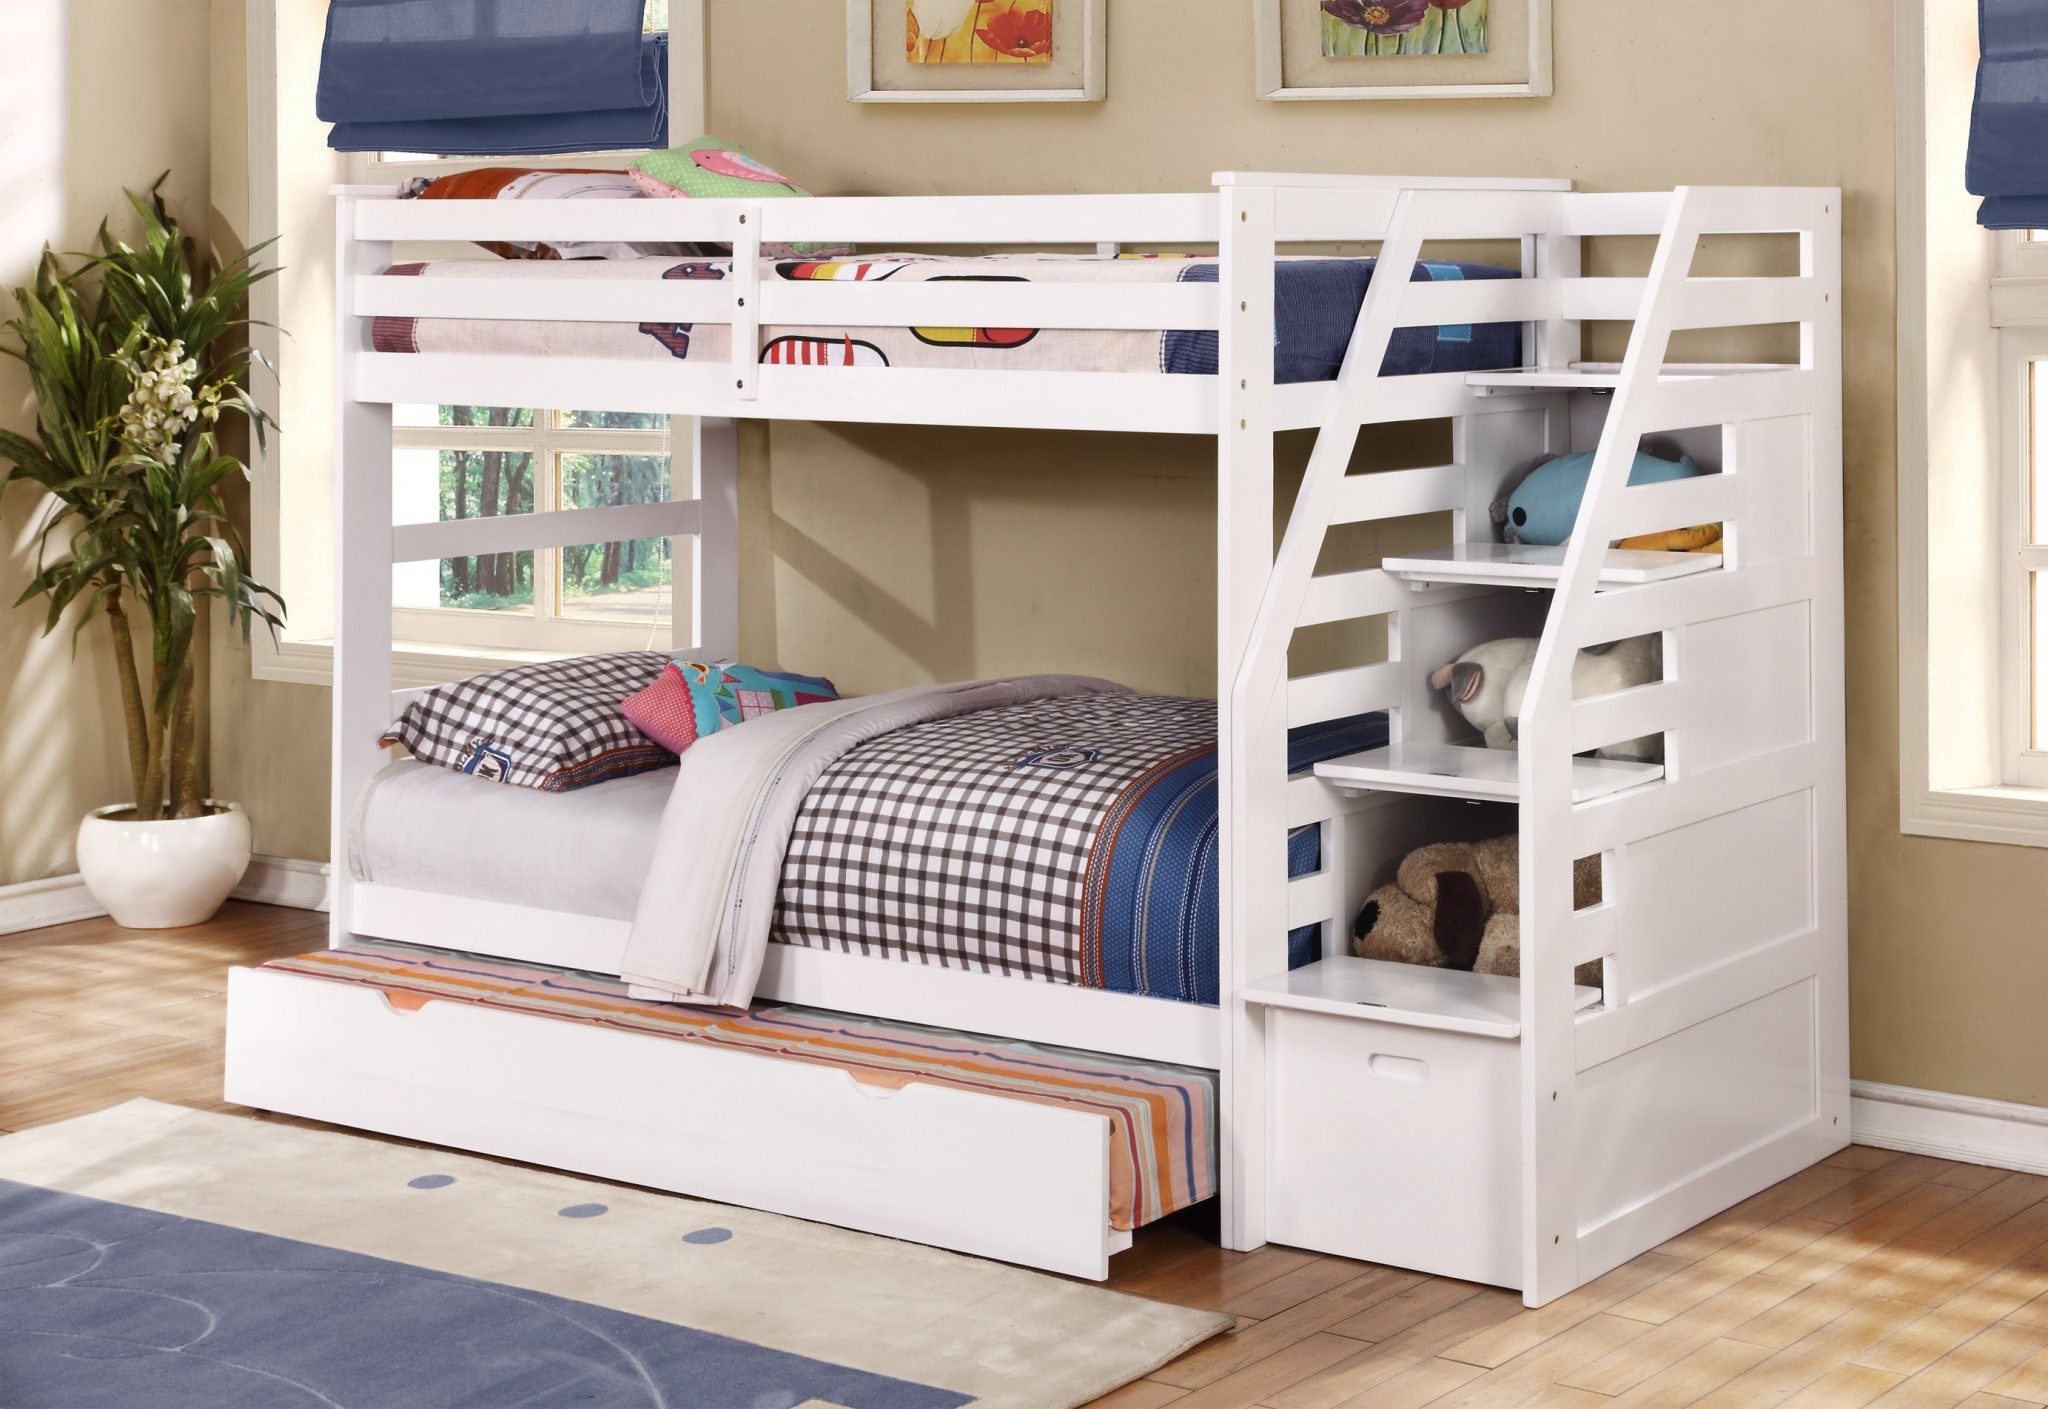 77.75" X 43.5" X 62.5" White Manufactured Wood and Solid Wood Twin or Twin Staircase Bunk Bed with Trundle & Storage Steps